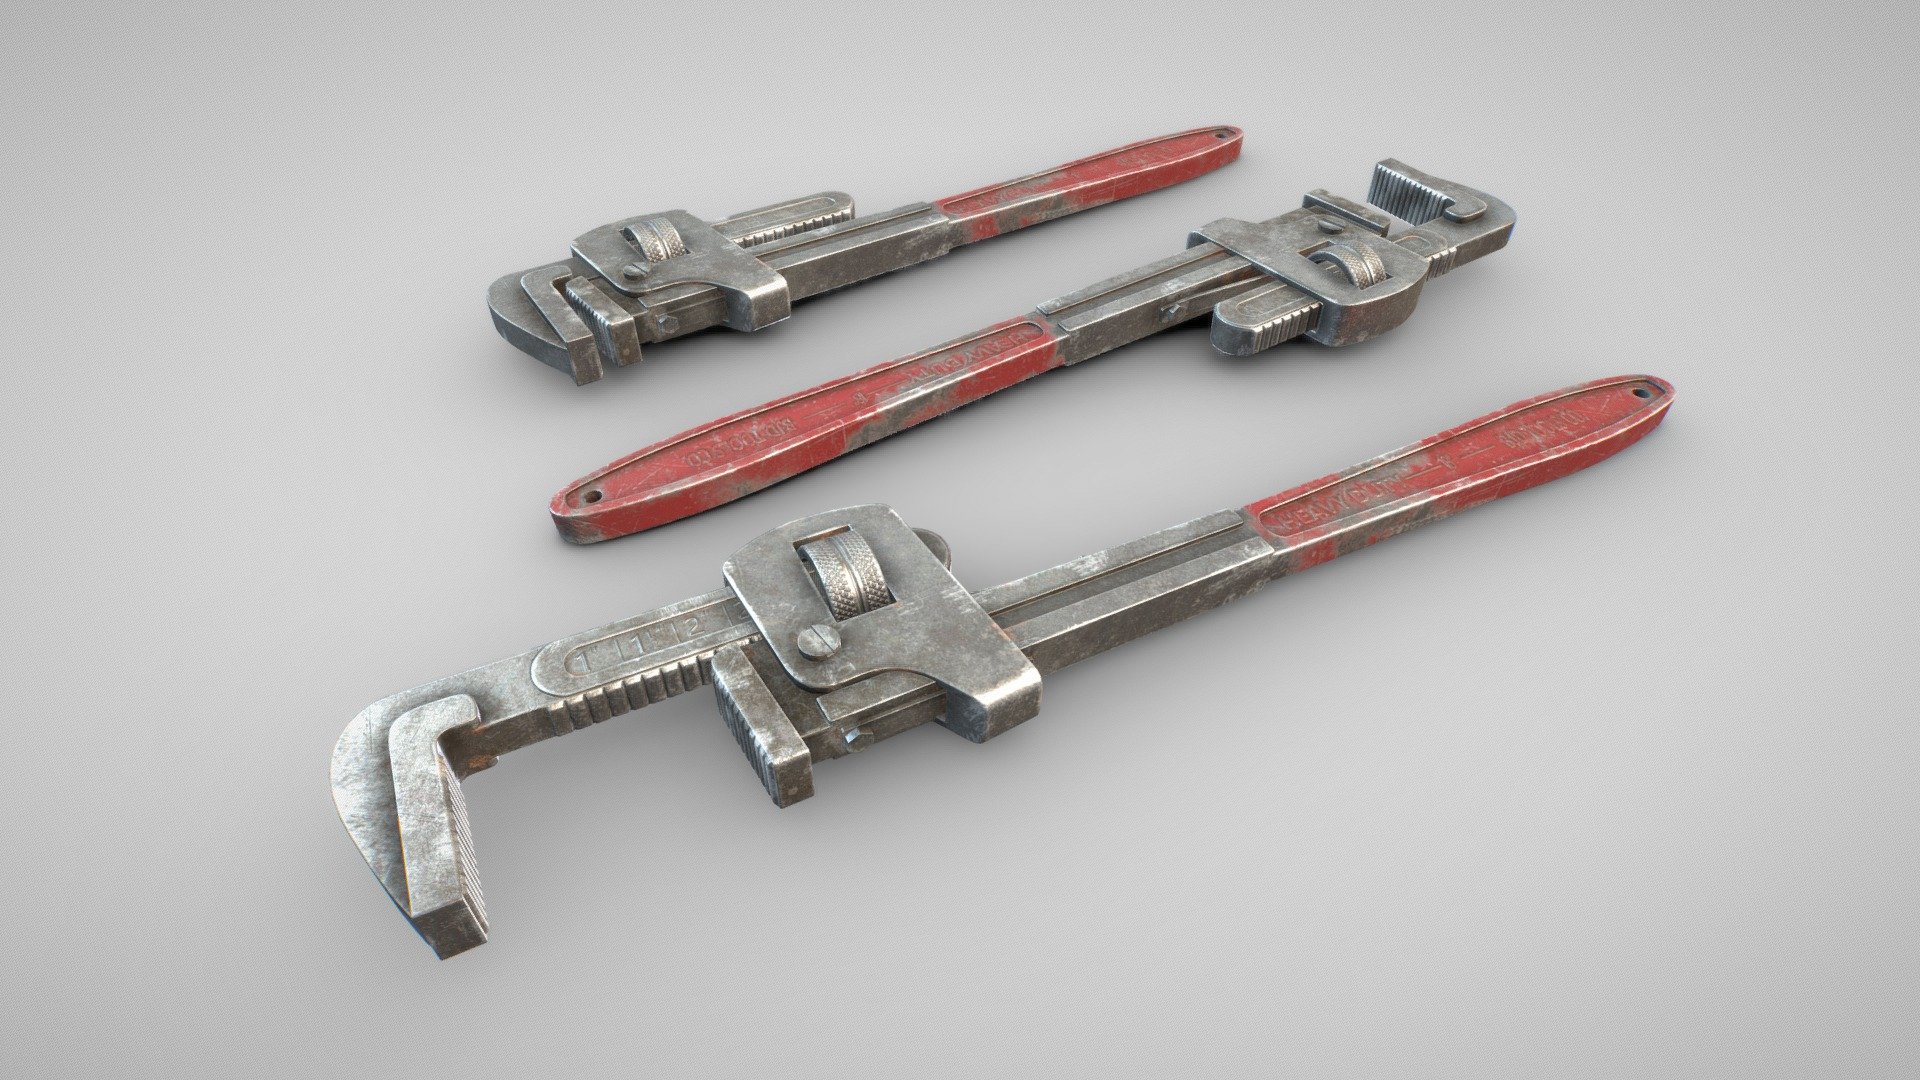 A 3D model of a pipe wrench made for use in games. 

Model is low poly made with PBR textures. It is made to real world scale. Comes with a high poly version as well as a low poly version.

Low Poly- Verts:3,307 Polys:3,500

High Poly- (Presmoothing)- Verts:14,372 Polys:28,624 

Included file formats:

.obj

.fbx

.max

.blend

Tested in: 3DsMax, Maya, Blender, Unreal

Note: Textures only apply to low poly model, high poly does not come with UV's or Textures.

I am available to work with you on your next freelance project! - Pipe wrench - Buy Royalty Free 3D model by BradyJDesign 3d model